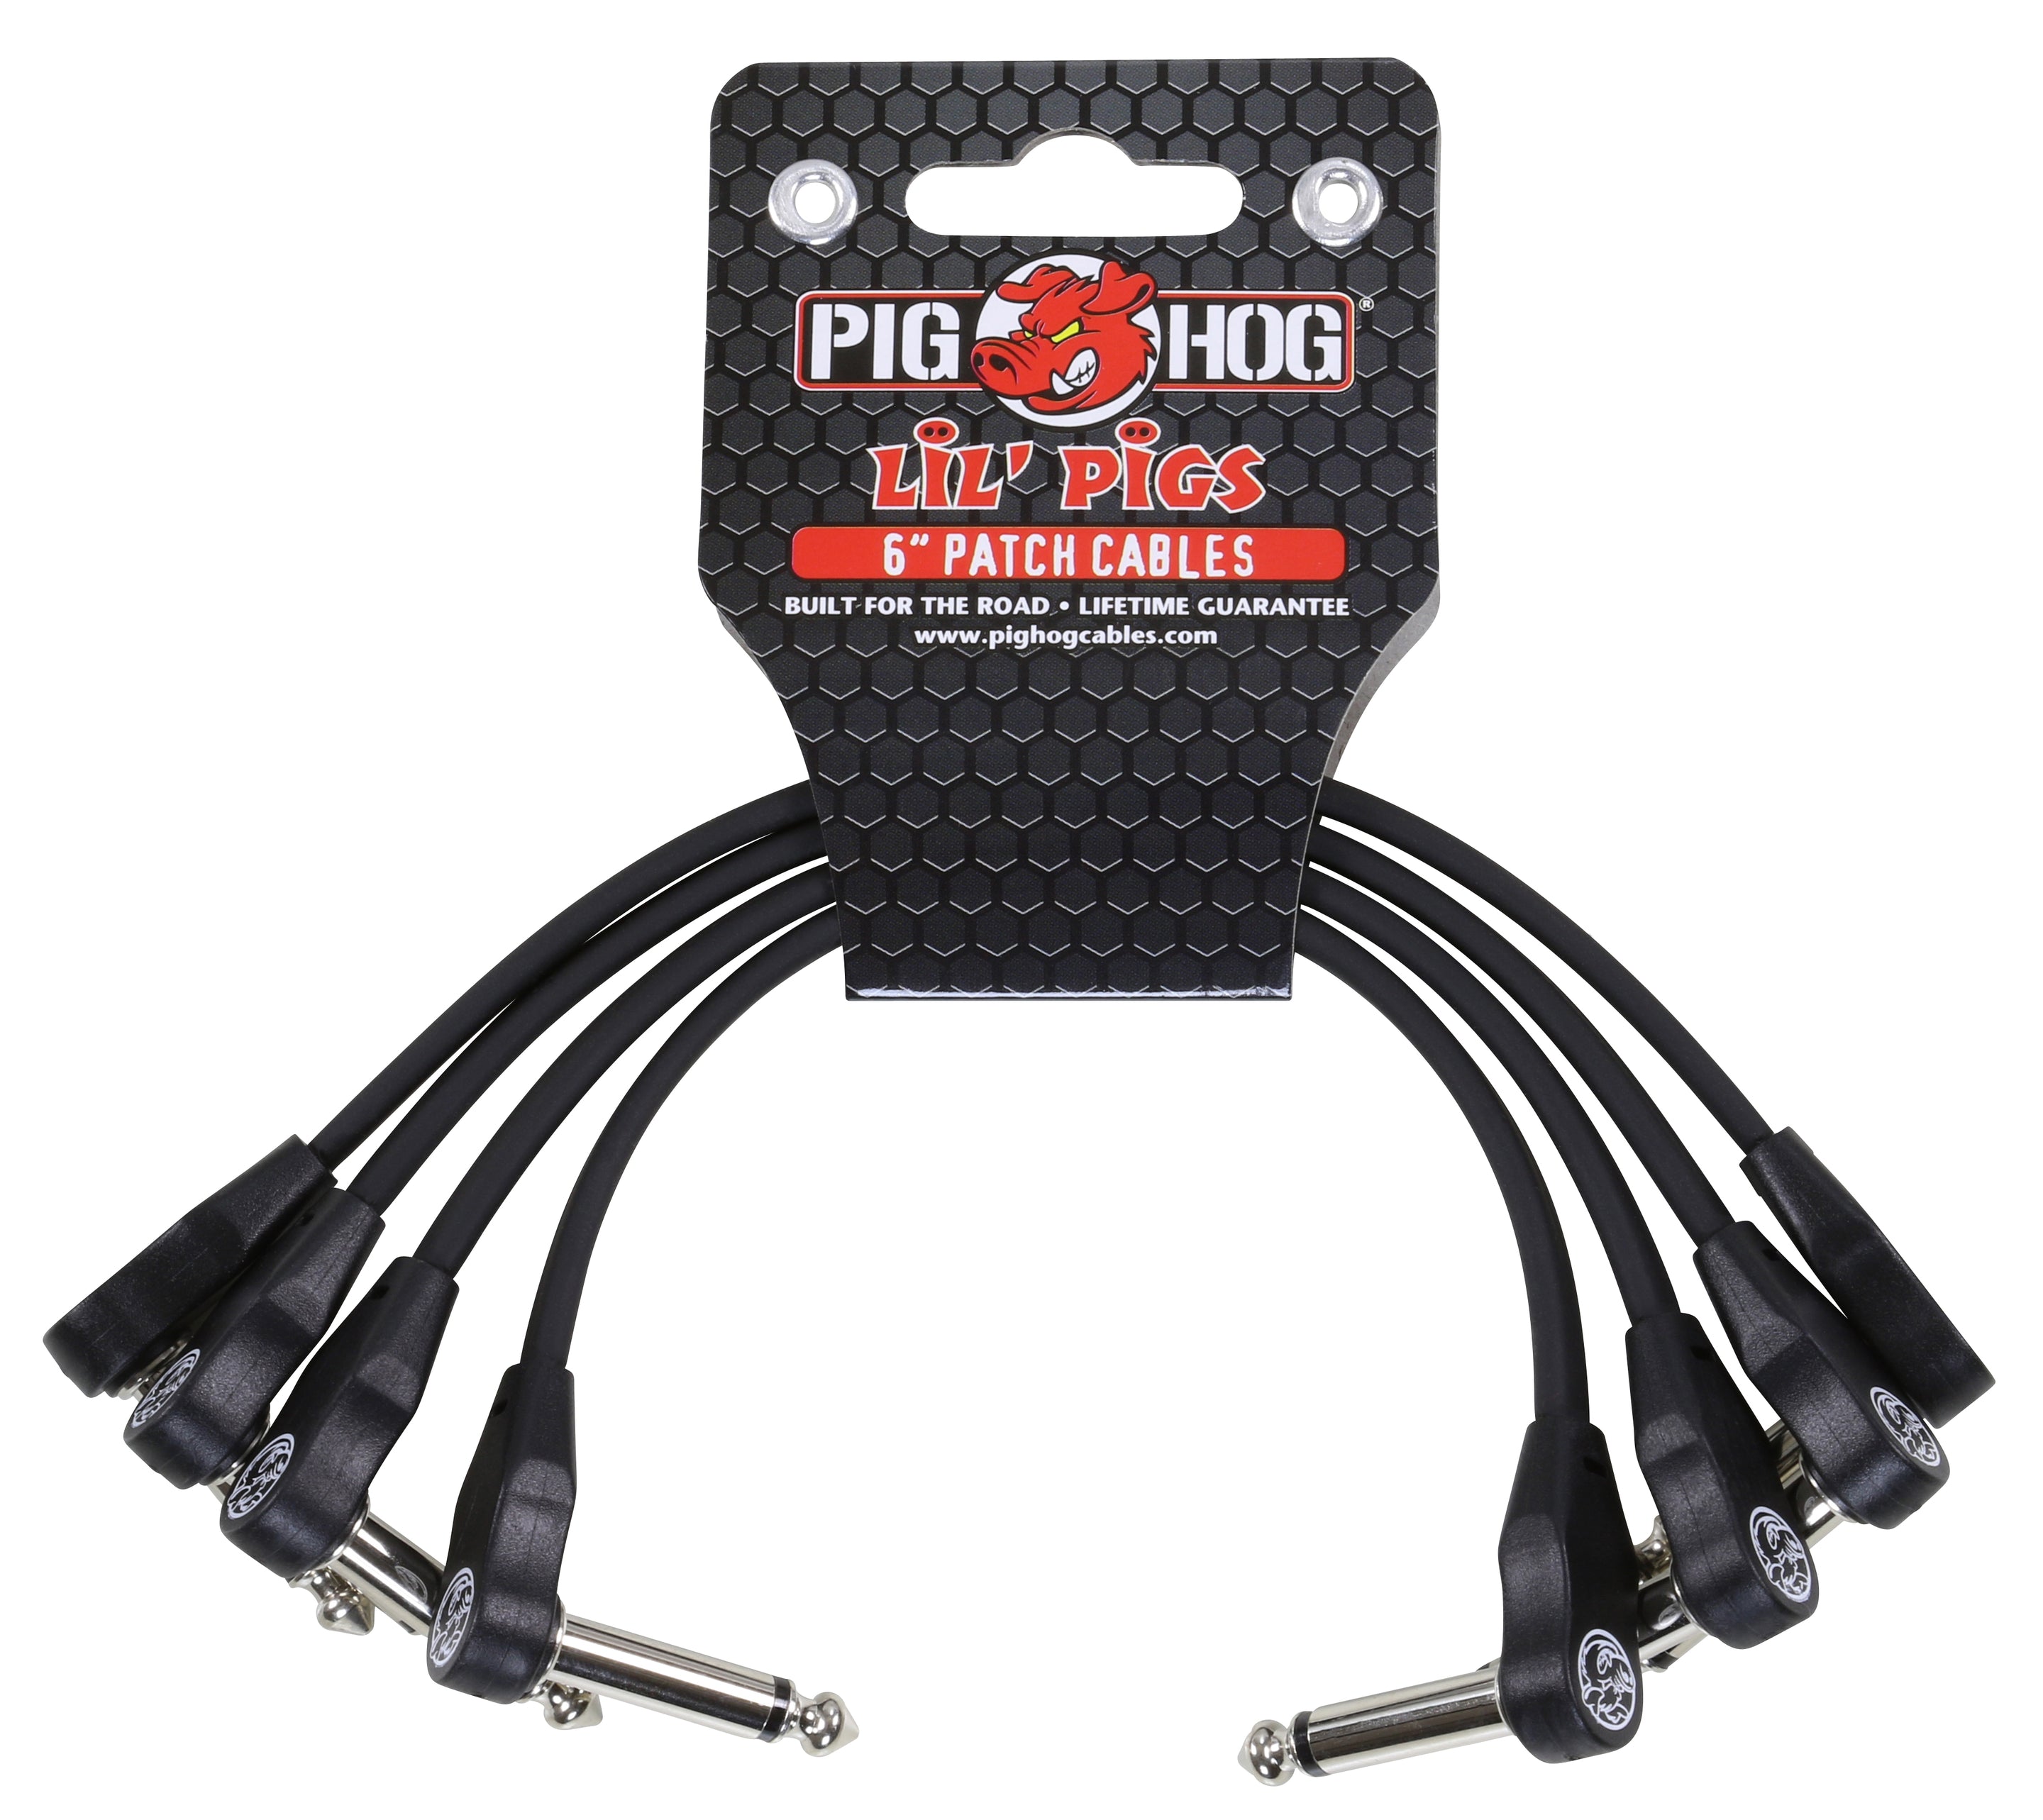 Pig Hog "Lil Pigs" 6inch Patch Cables, 4 Pack